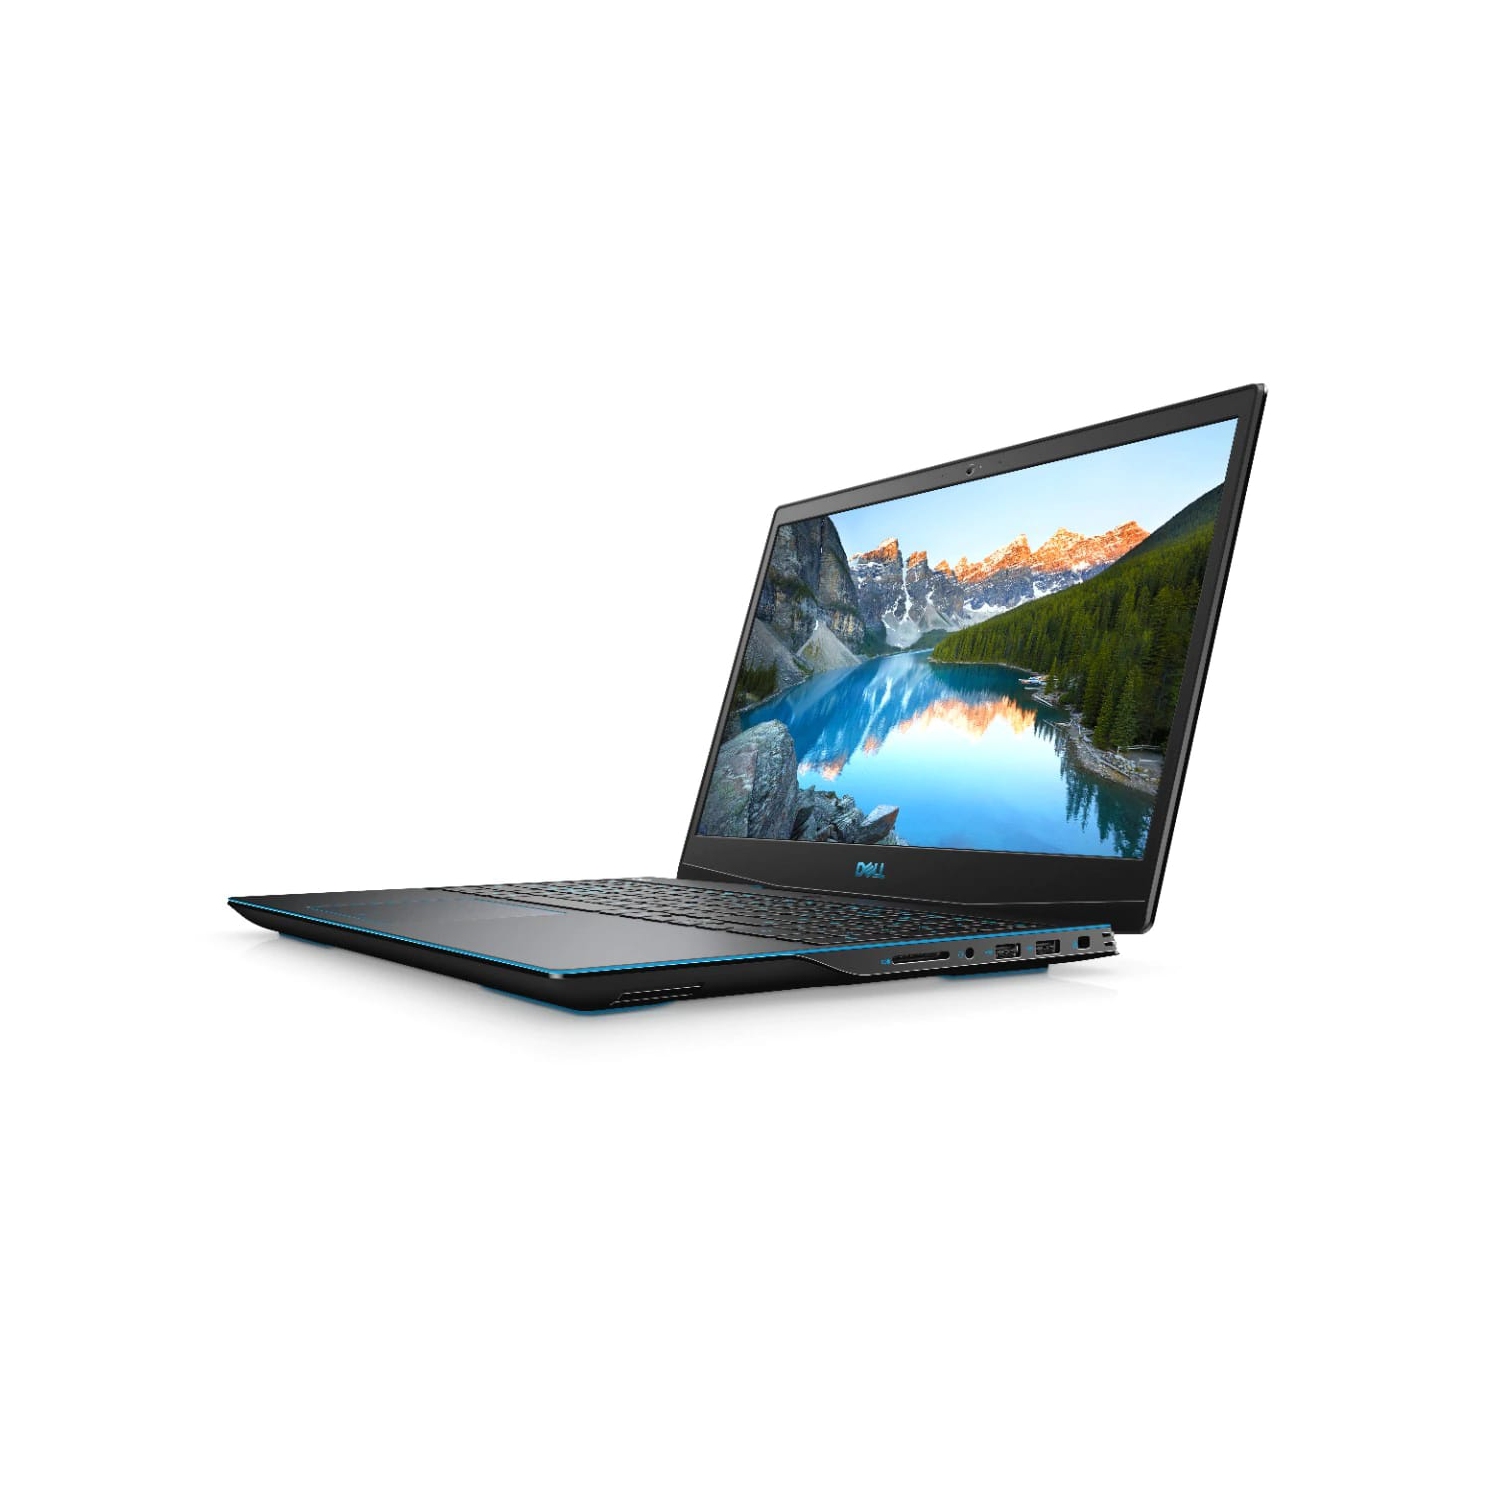 Refurbished (Excellent) – Dell G3 3500 Gaming Laptop (2020) | 15.6" FHD | Core i5 - 512GB SSD - 16GB RAM - 1650 Ti | 4 Cores @ 4.5 GHz - 10th Gen CPU